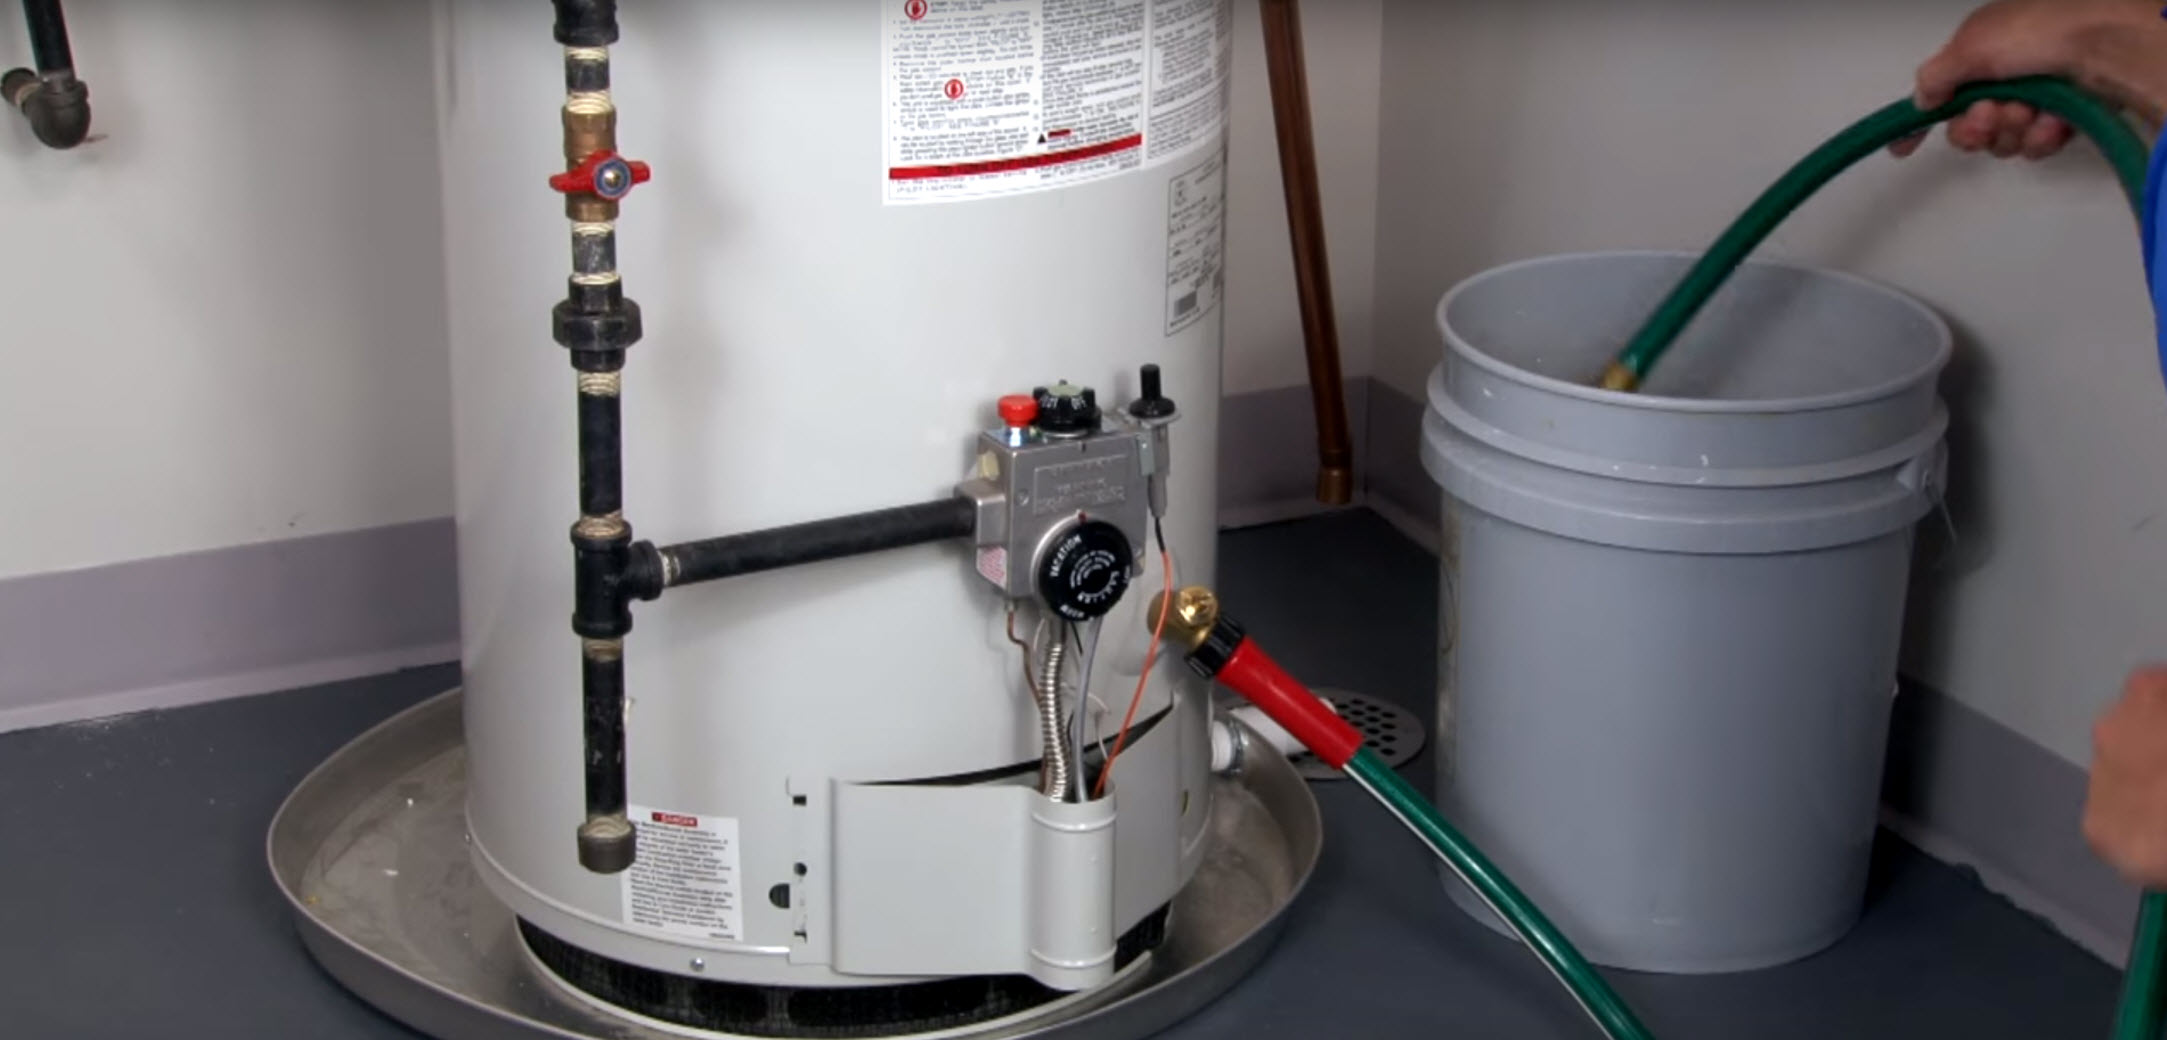 Common Water Heater Problems Water Temperature Too Hot Symptom